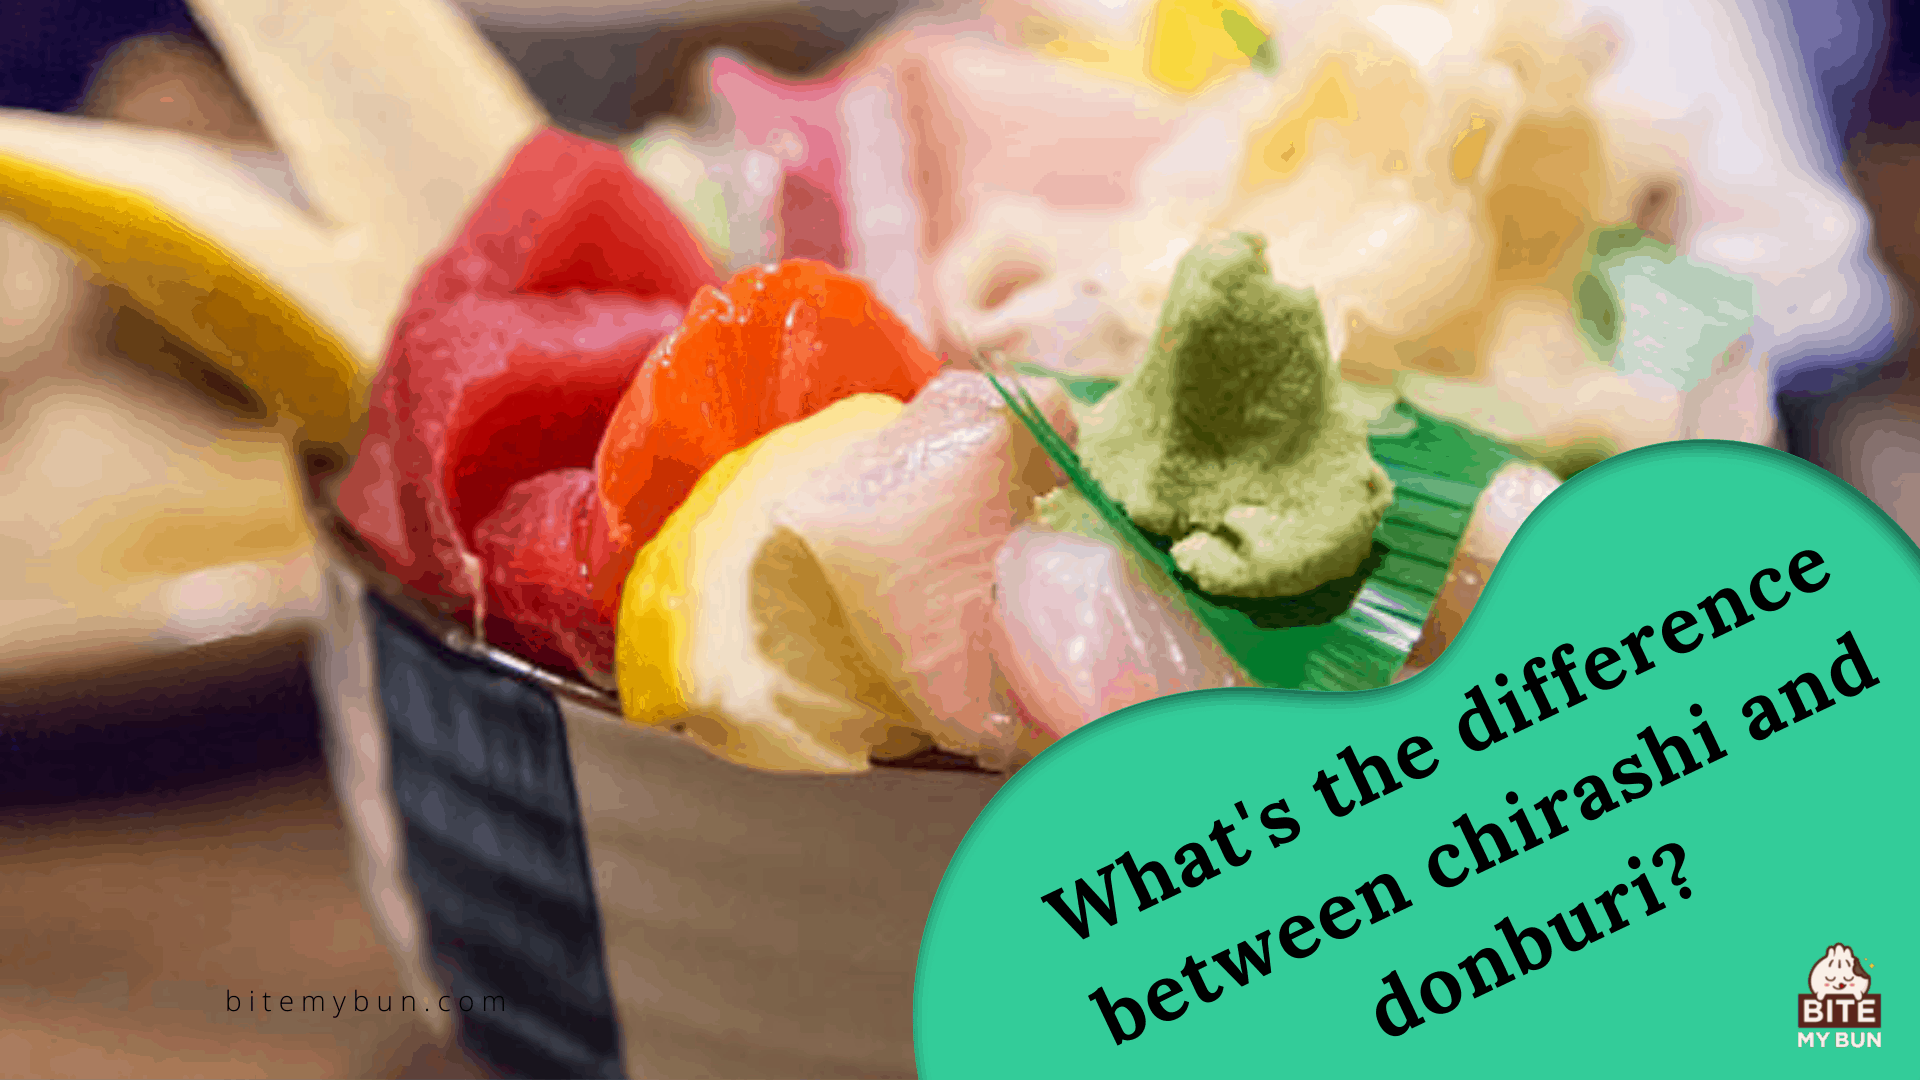 What's the difference between chirashi and donburi?